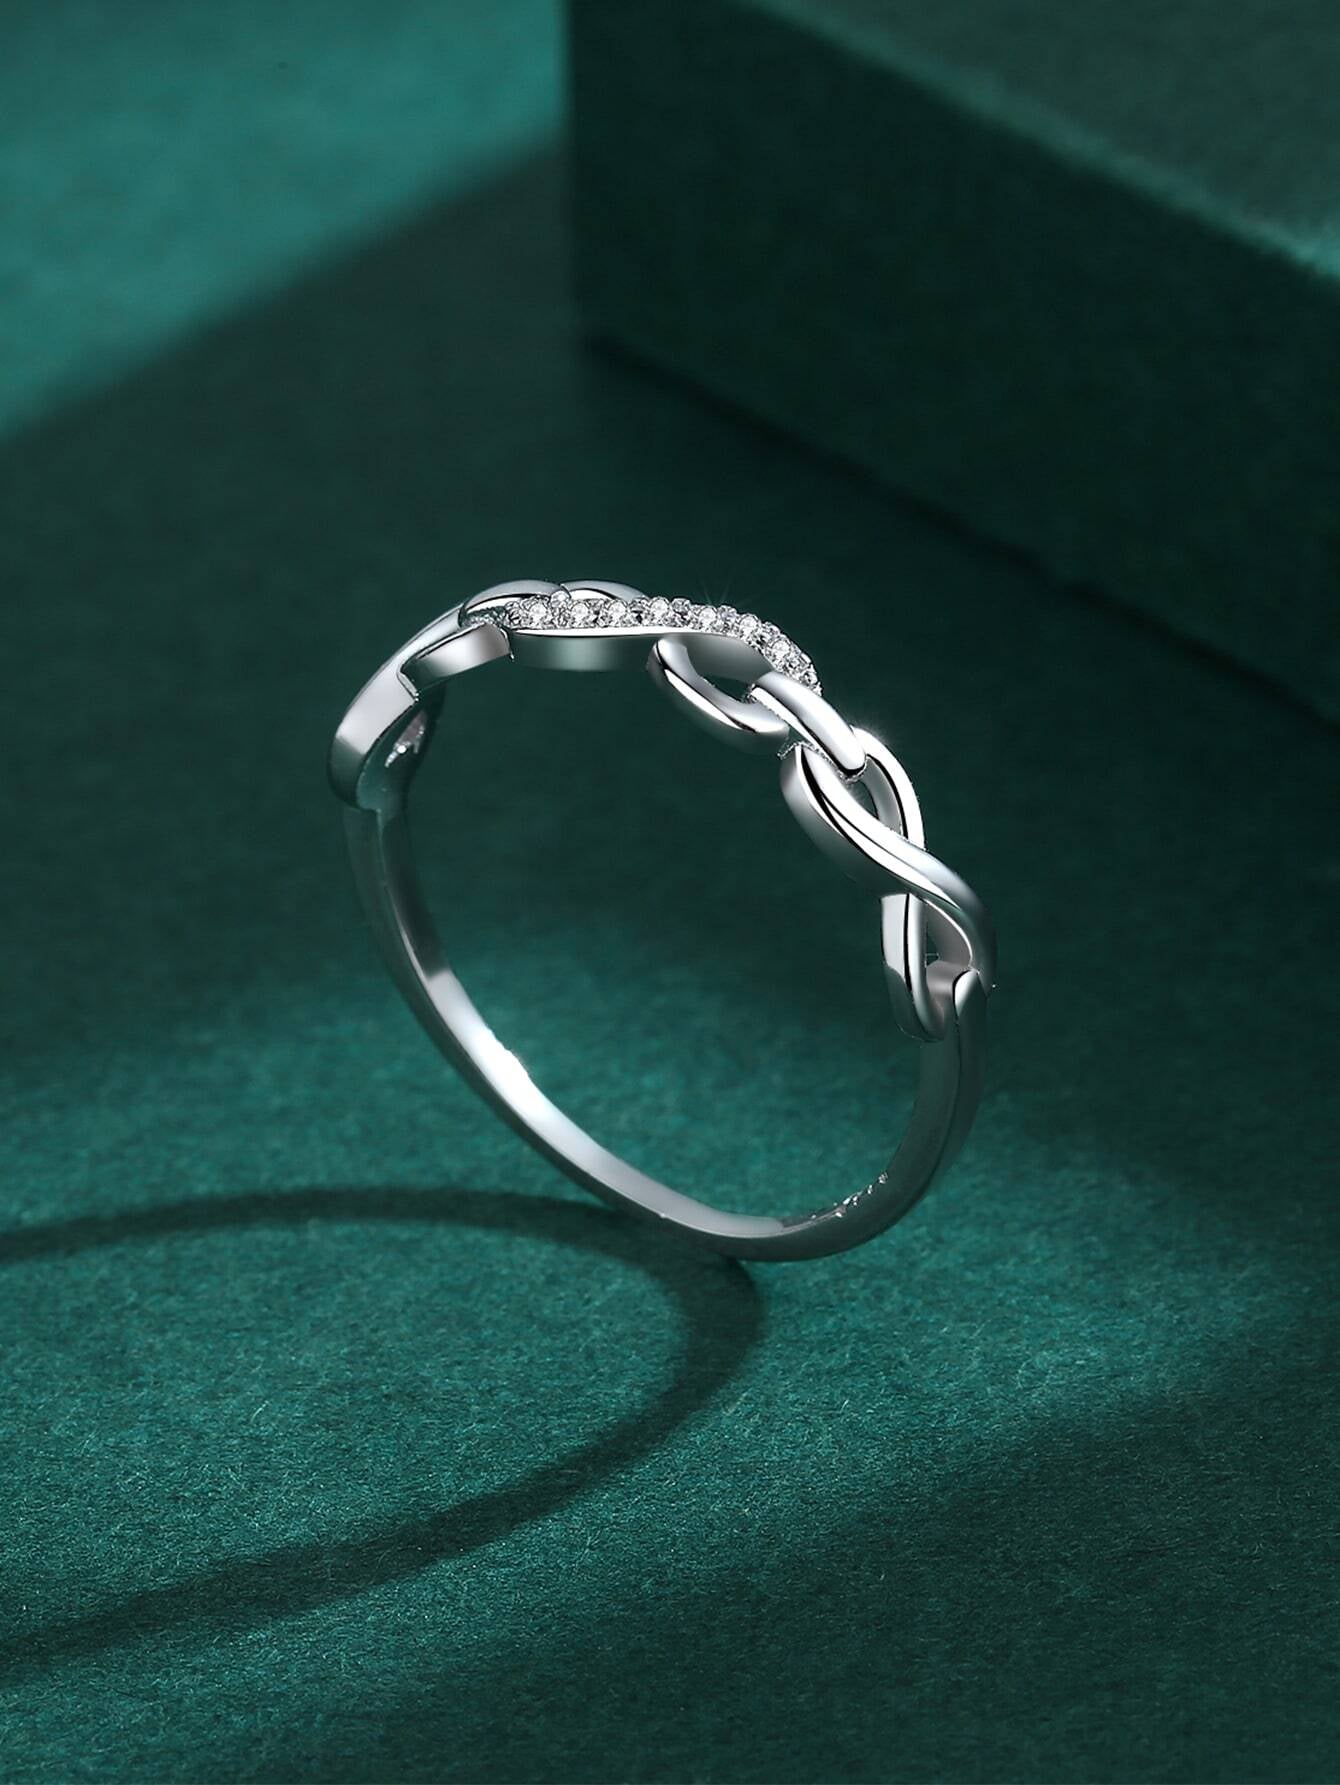 925 Sterling Silver Ring with Uncommon Geometric Design - Intended for Both Finger and Pinky, Designed for Women.